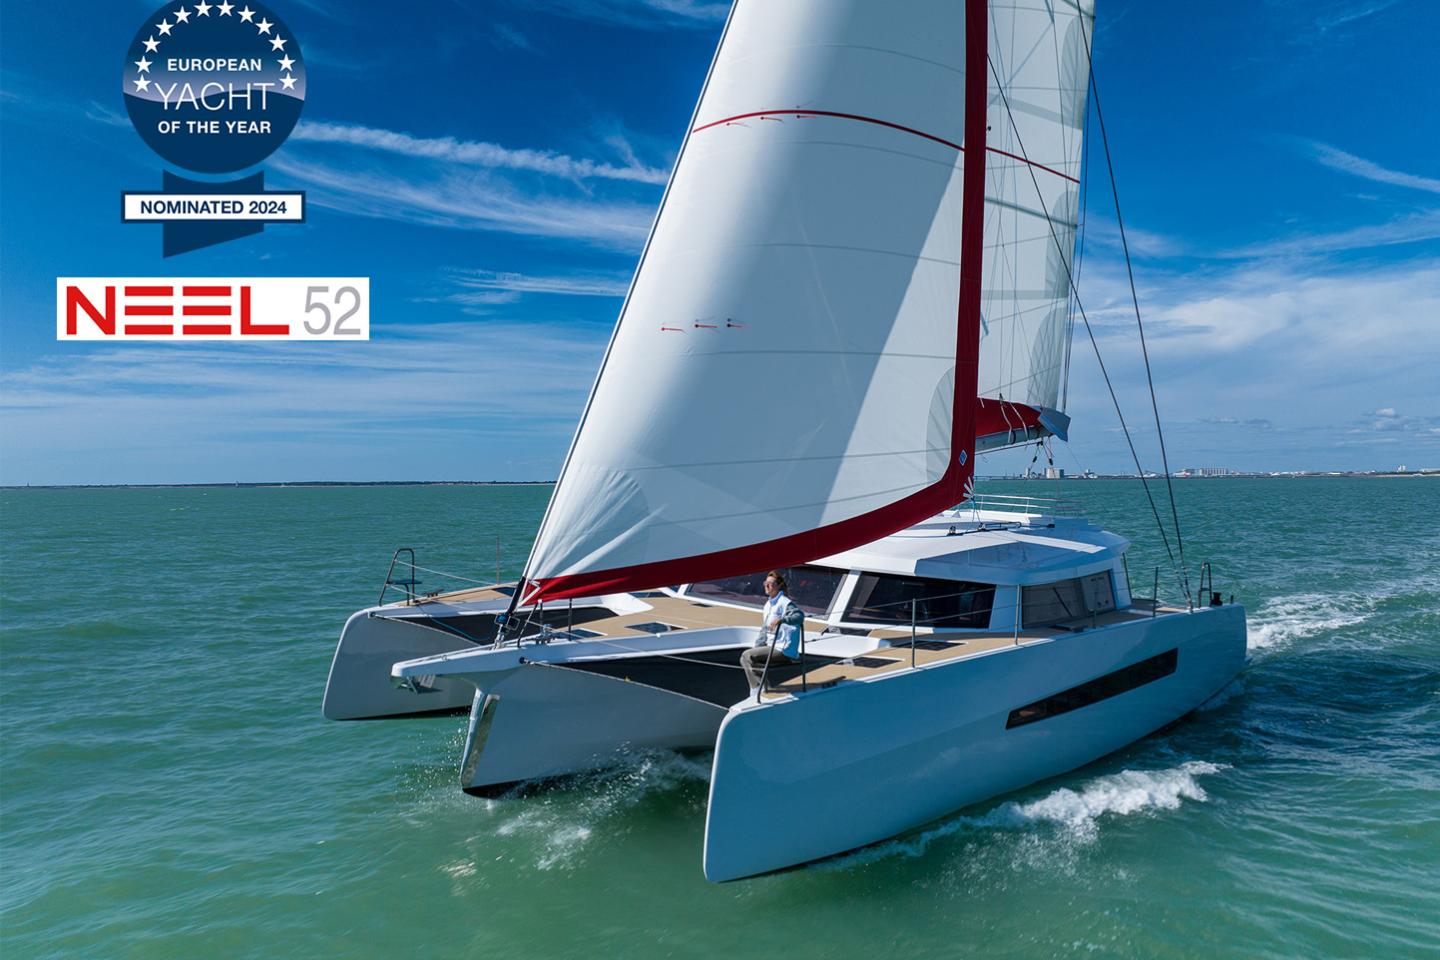 NEEL 52 nominated european yacht of the year 2024